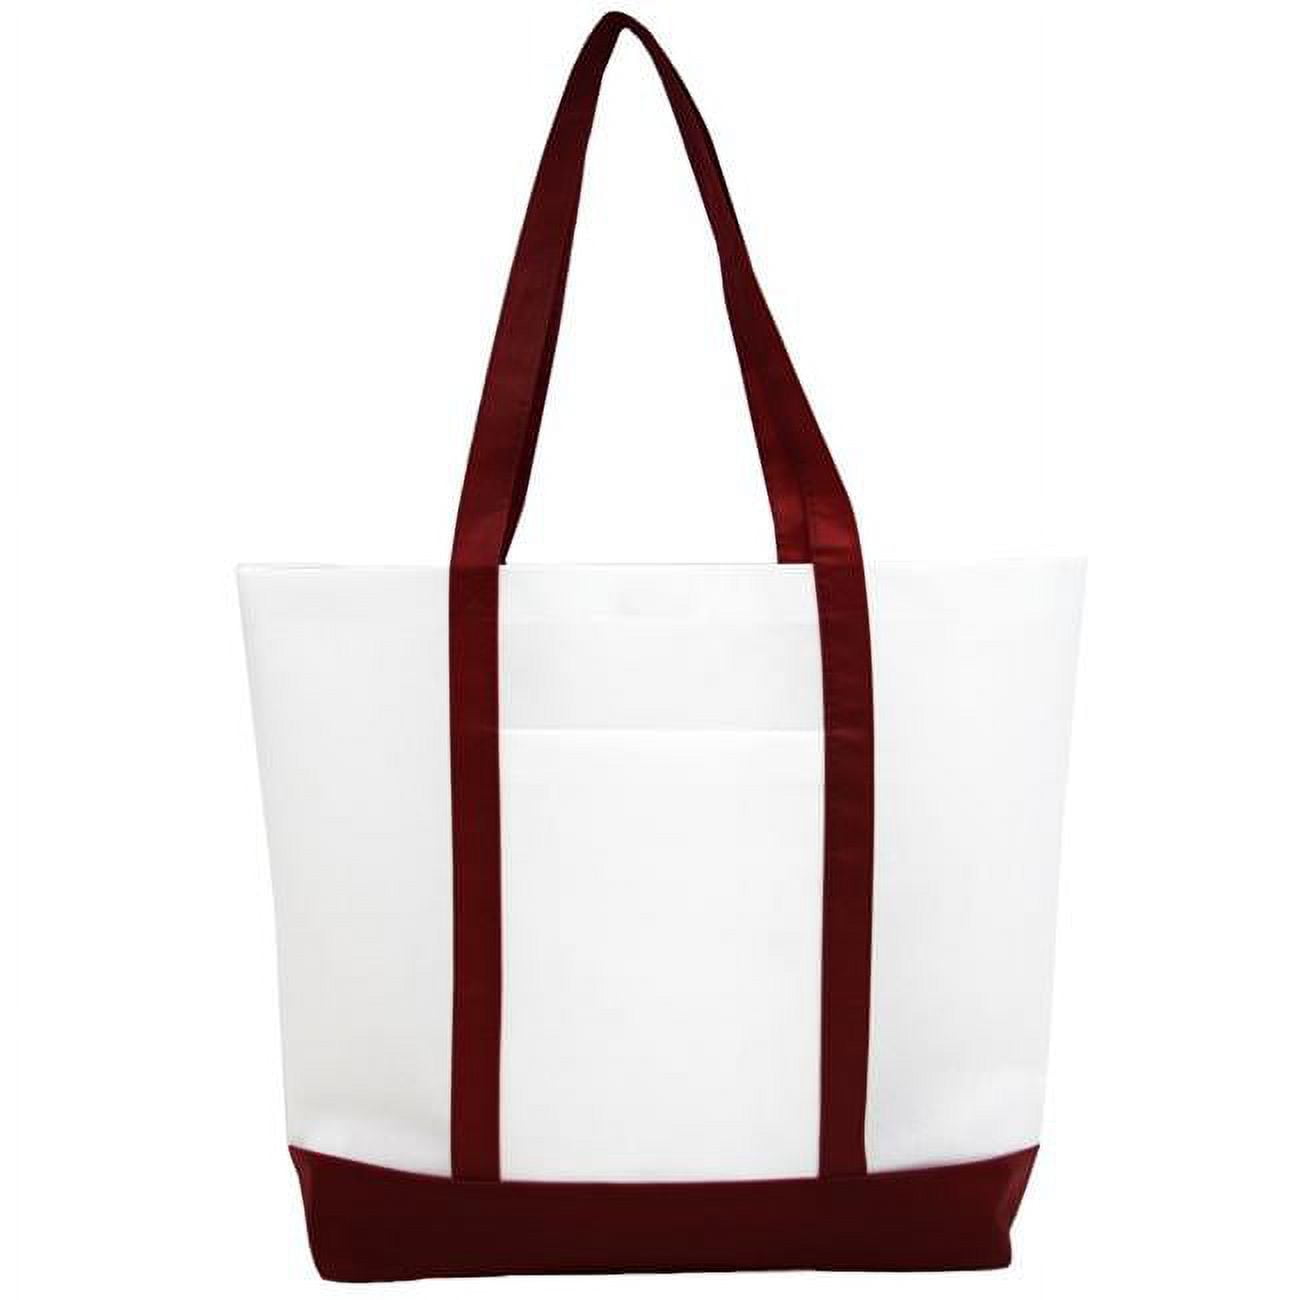 Nw300bur Non Woven Tote With Pocket, Burgundy - 10 Pack